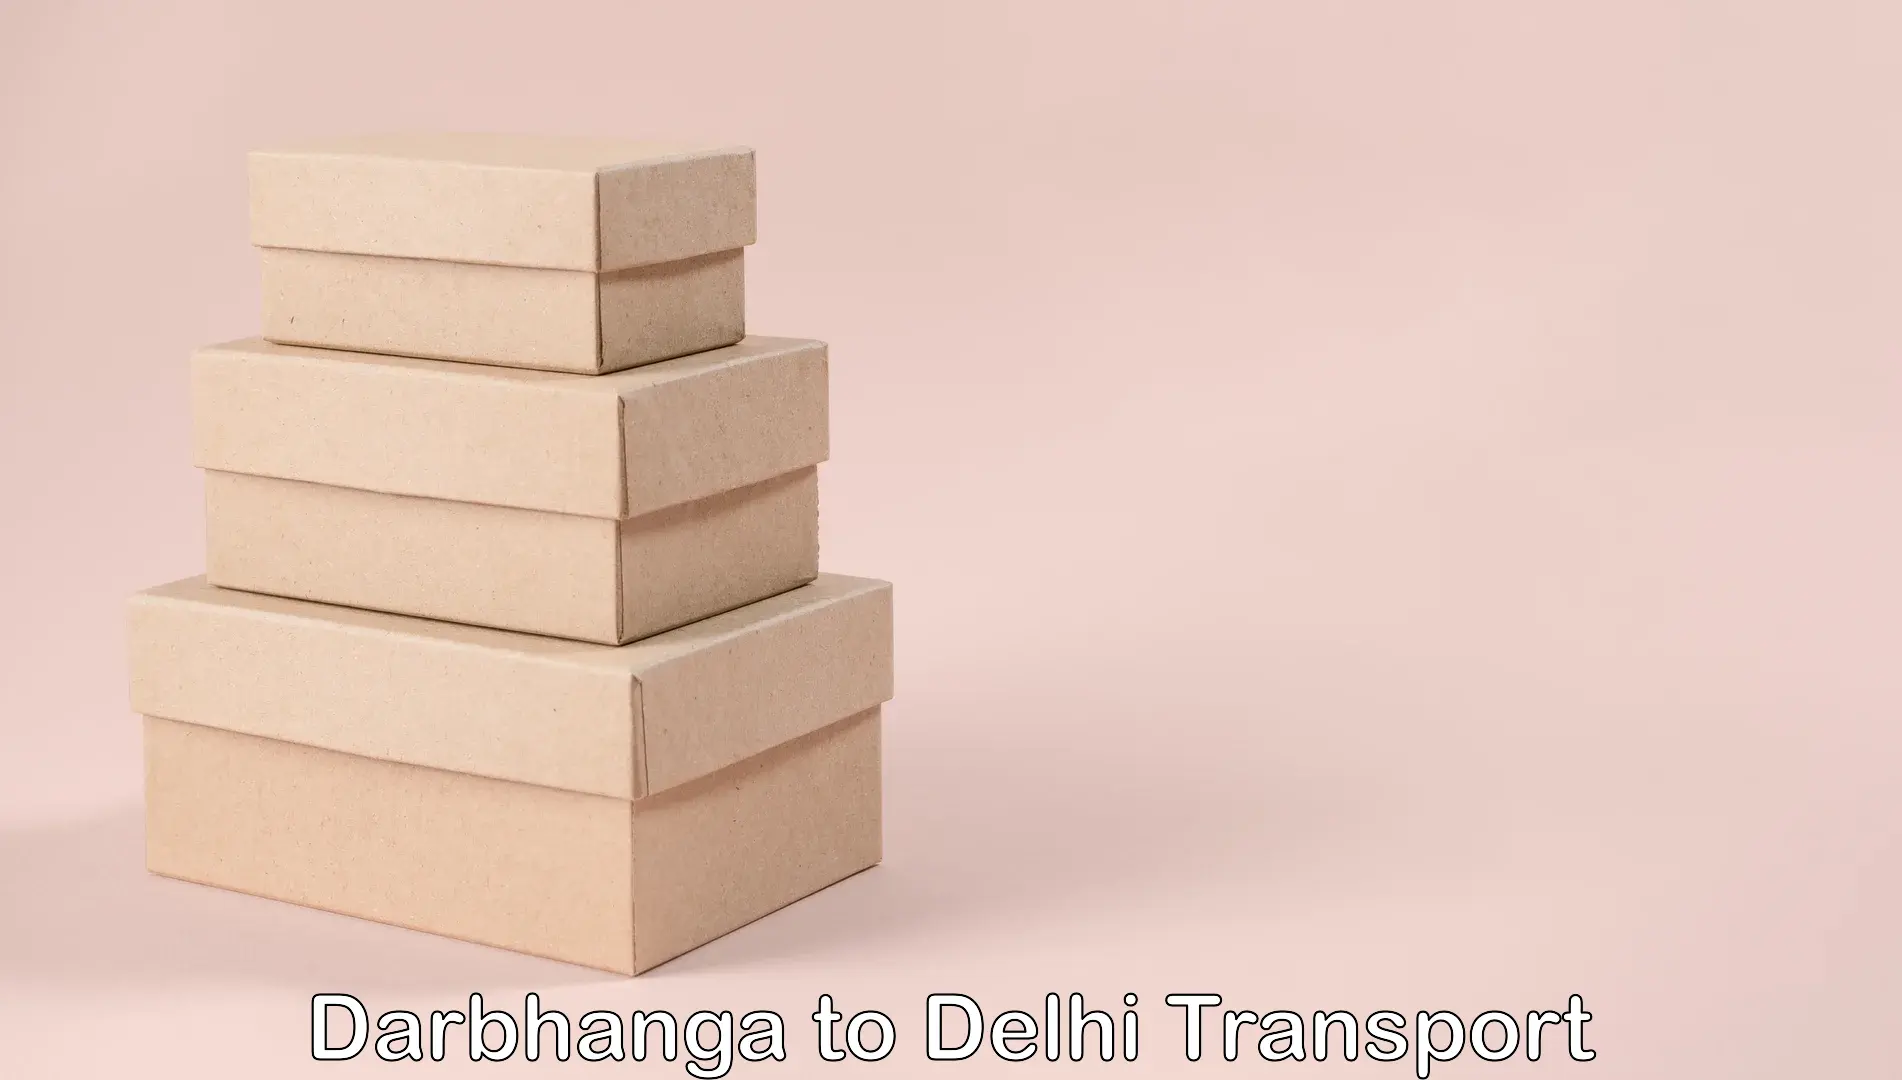 Container transport service Darbhanga to NCR